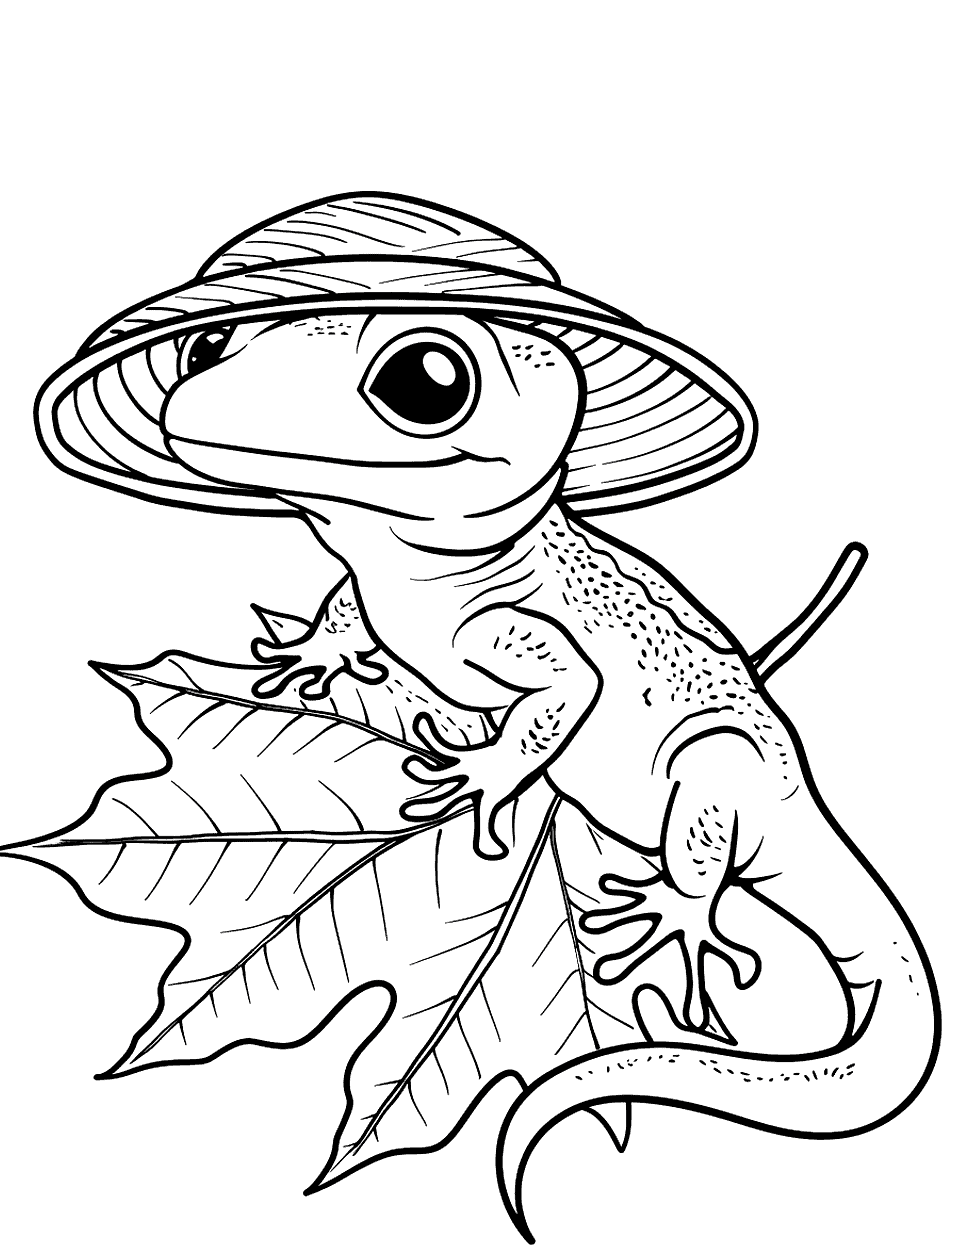 Gecko Wearing a Hat Lizard Coloring Page - A cute gecko wearing a straw hat, sitting on a leaf.